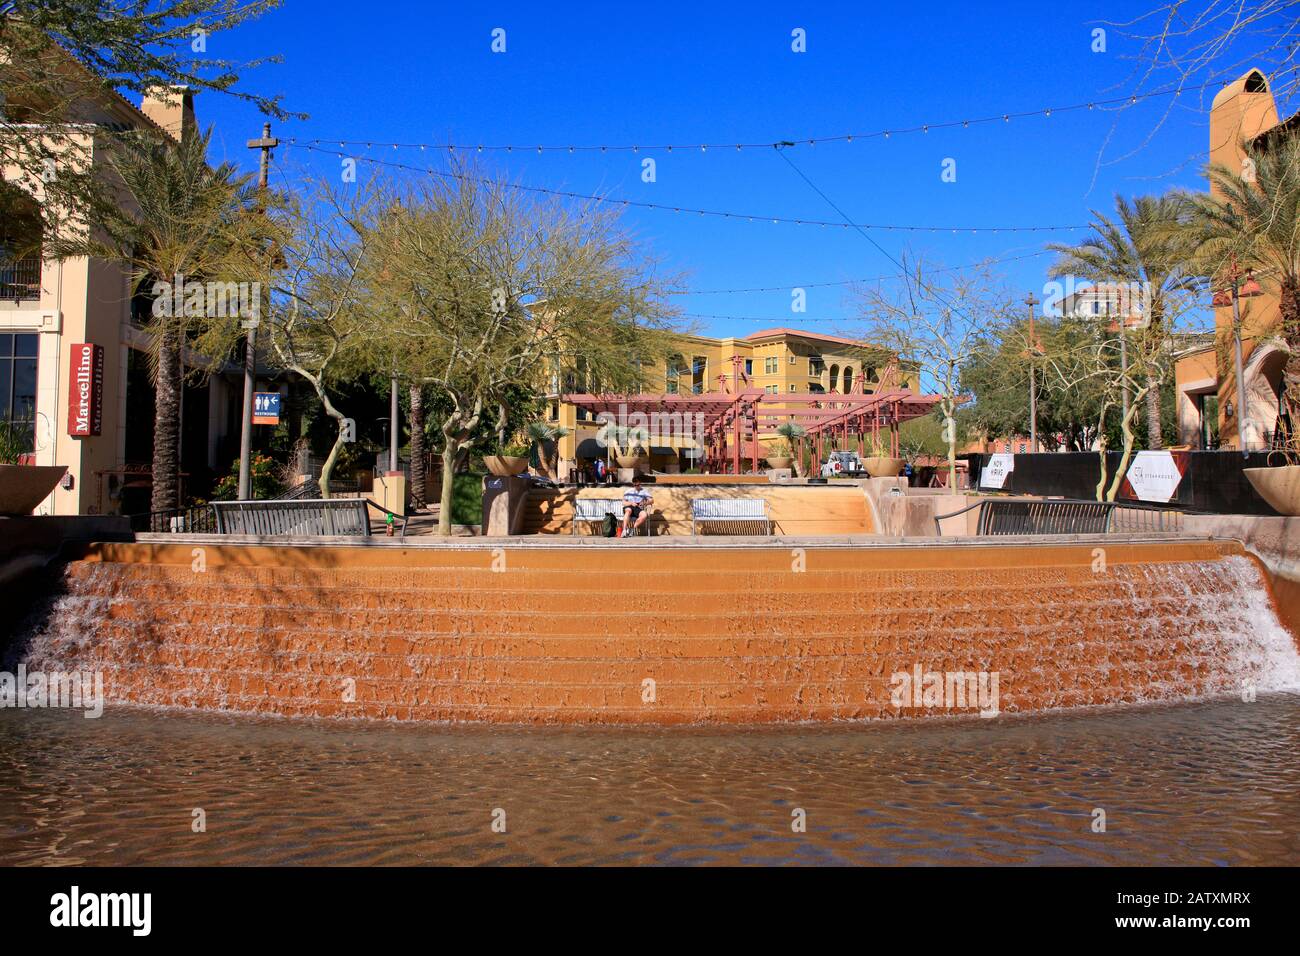 Waterfall park in the Southbridge district of Scottsdale AZ Stock Photo